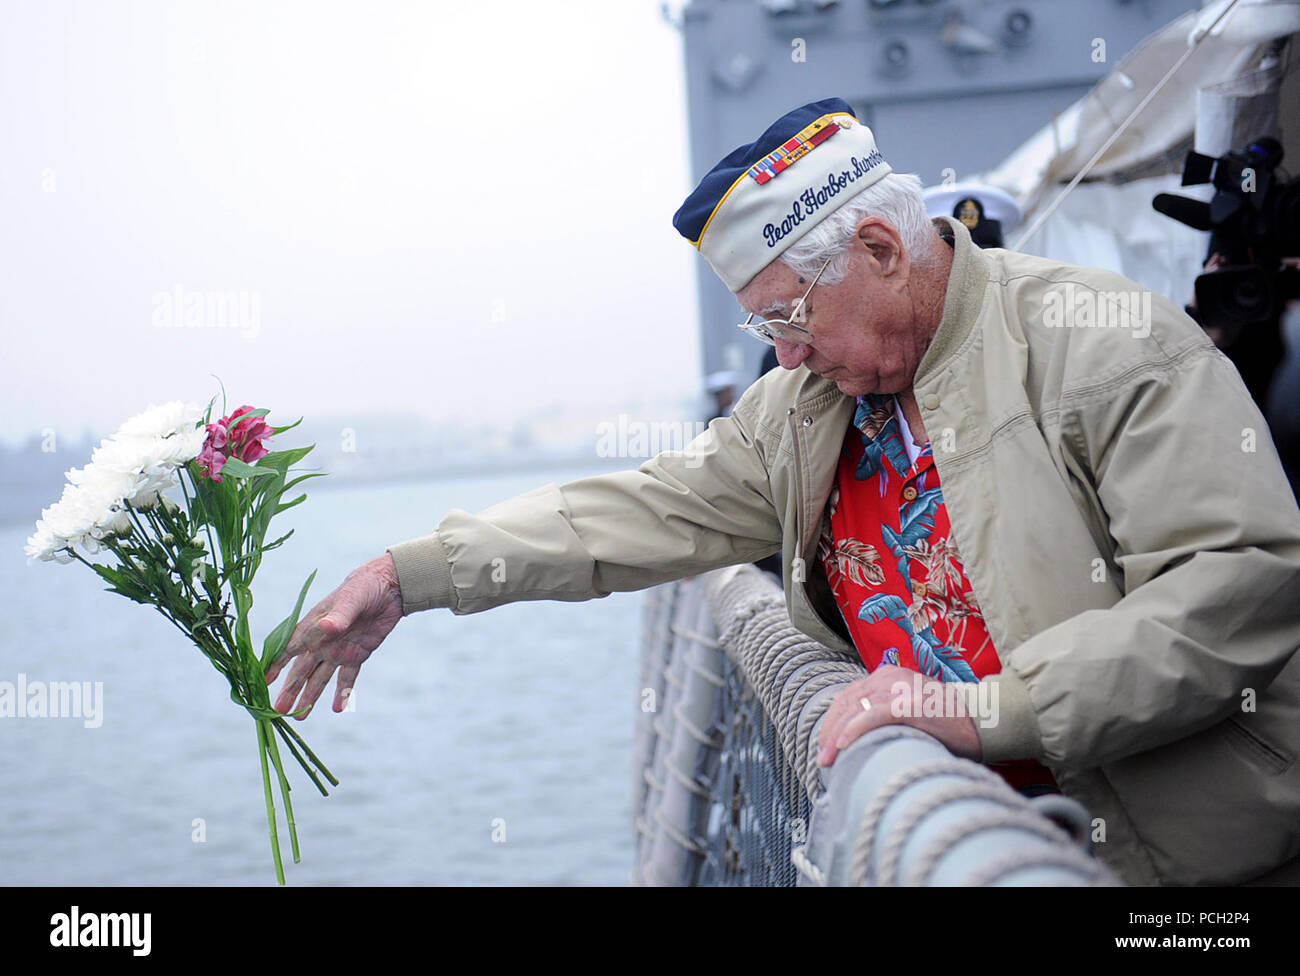 MAYPORT, Fla. (Dec. 7, 2012) Navy Seaman First Class Duane Reyelts, a survivor of the Dec. 7, 1941 Japanese attack on Pearl Harbor, tosses flowers off the side of the guided-missile frigate USS De Wert (FFG 45) during a Pearl Harbor Day ceremony. The ceremony commemorated the anniversary of the Dec. 7, 1941 Japanese attack on Pearl Harbor. Stock Photo